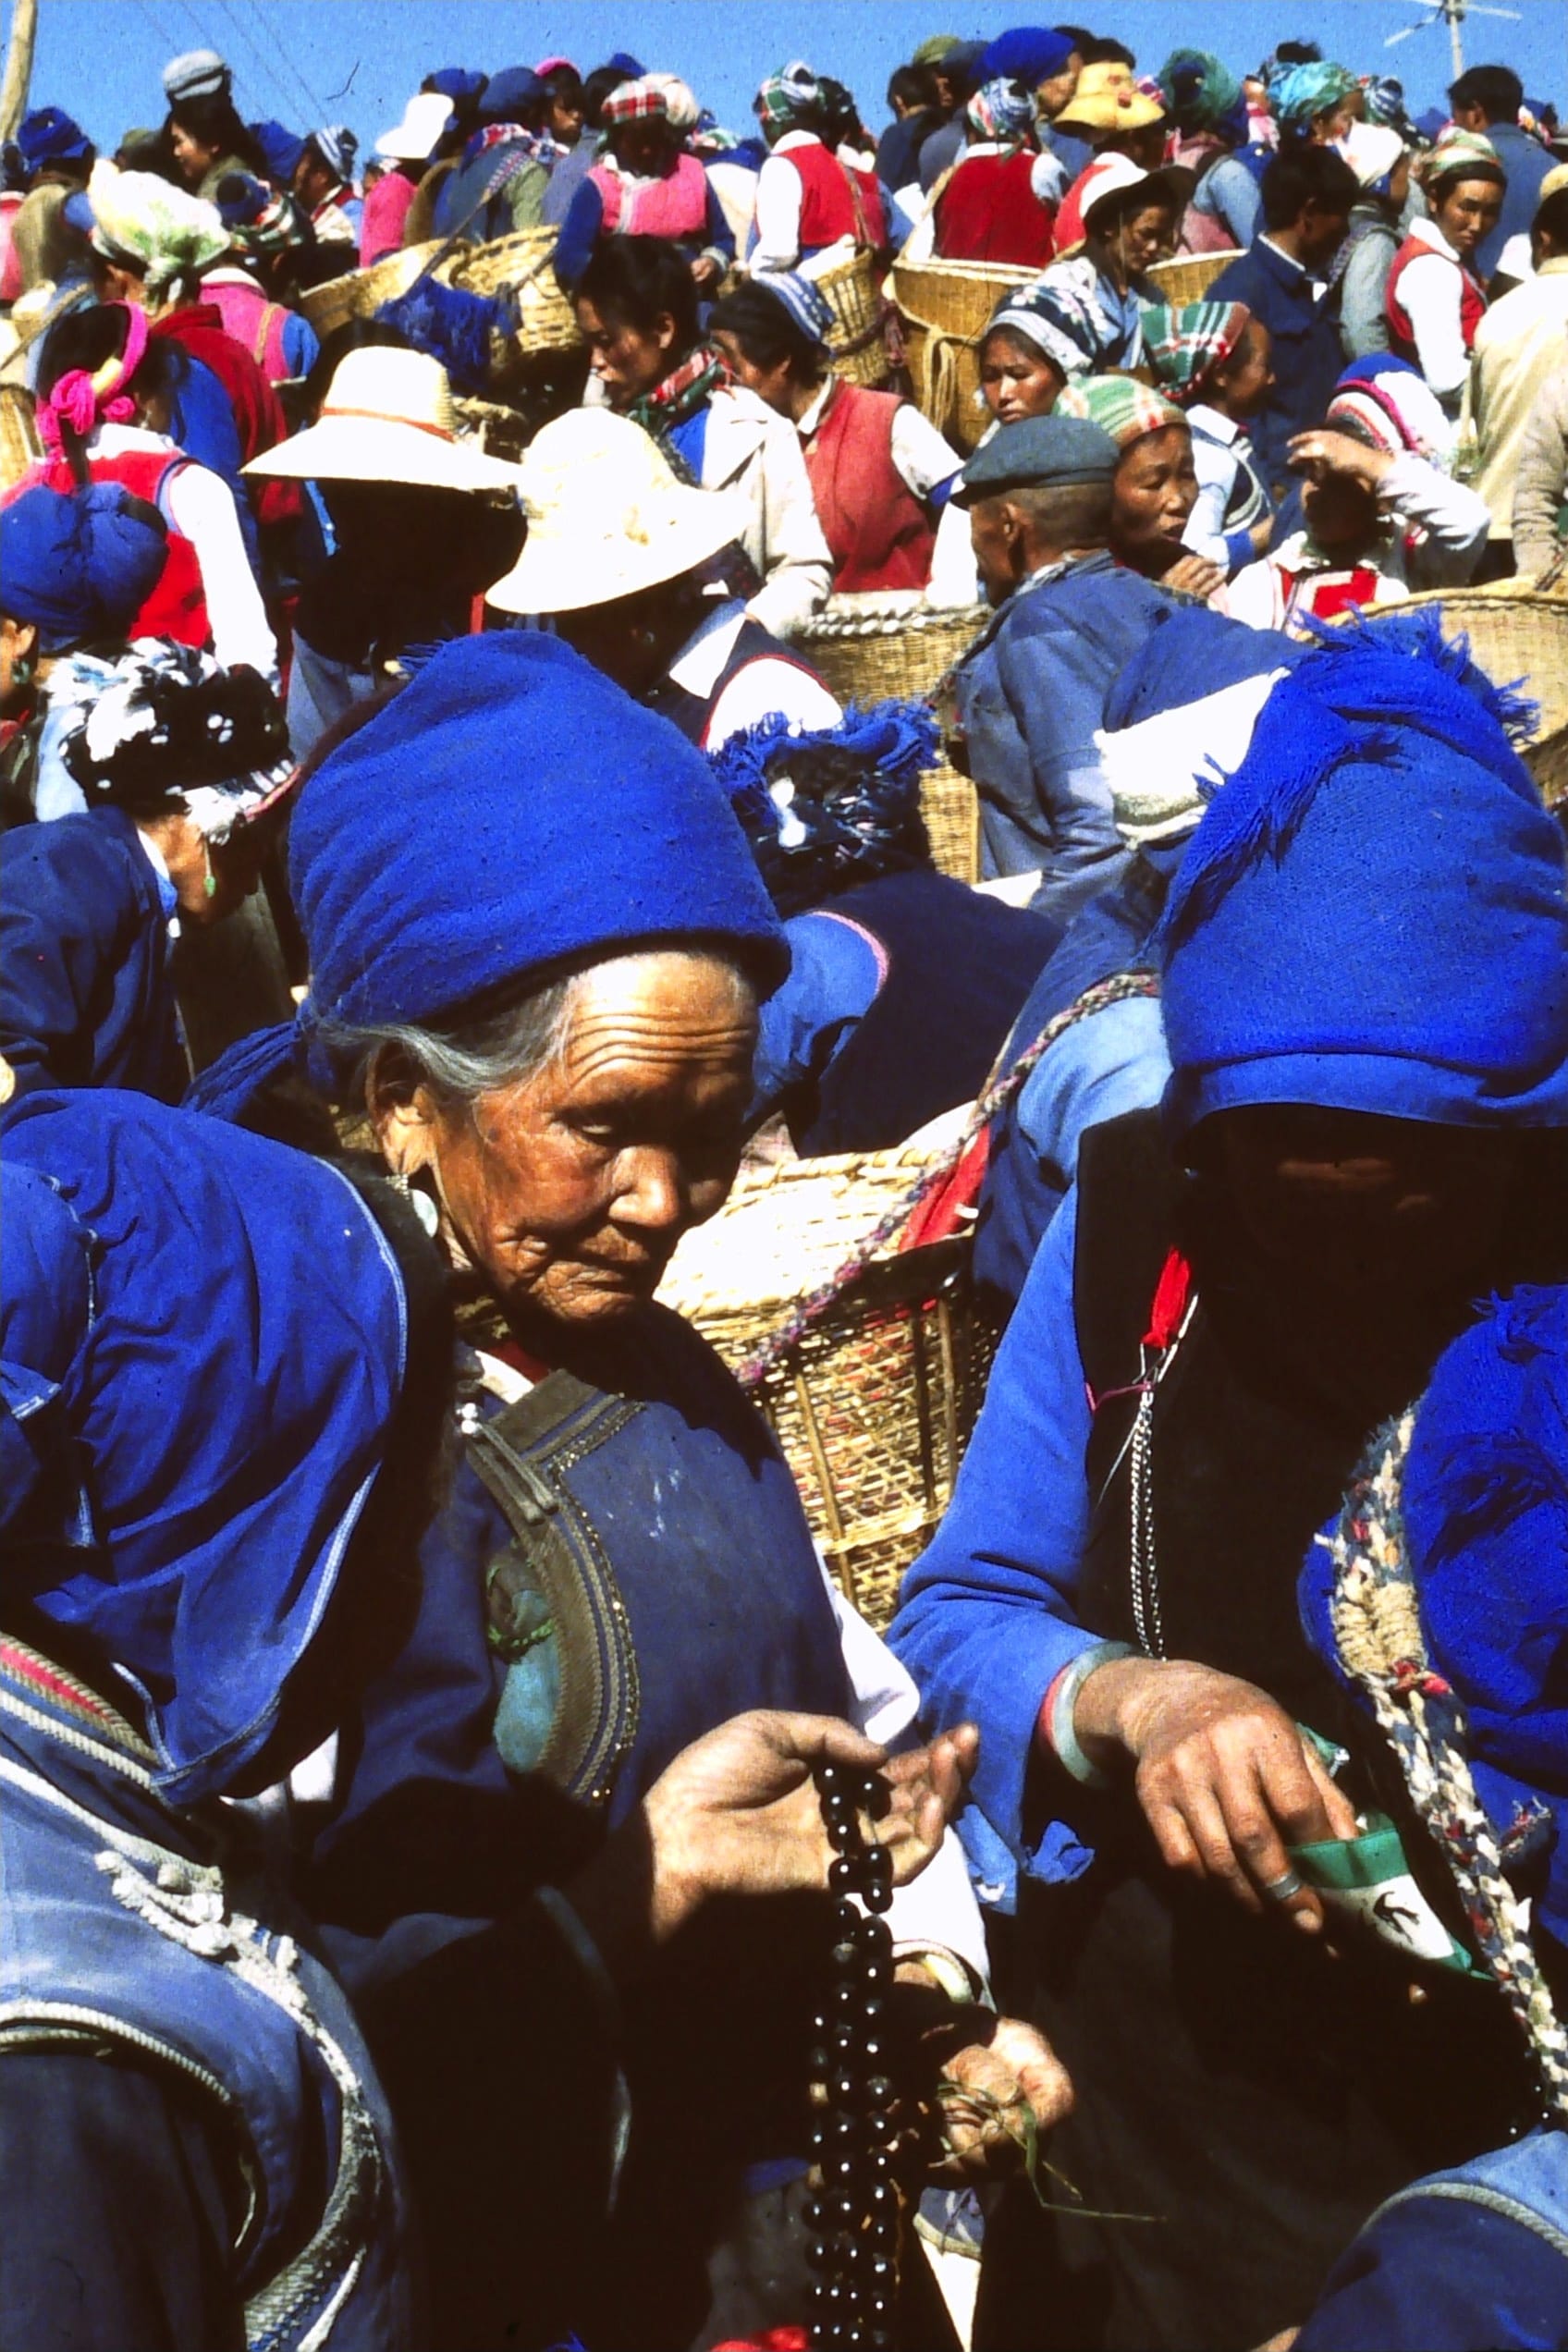 Open market outside Dali. Women wearing traditional dyed indigo clothes looking for bargains.